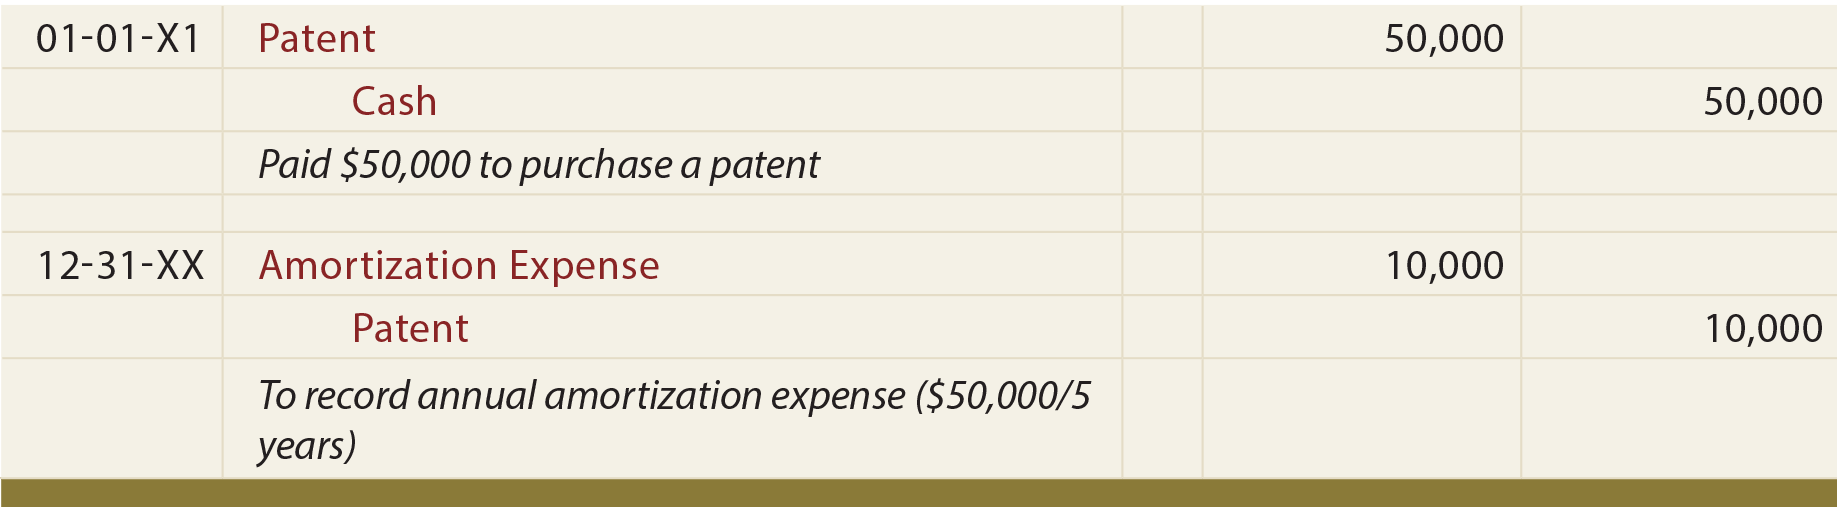 Patent Journal entry